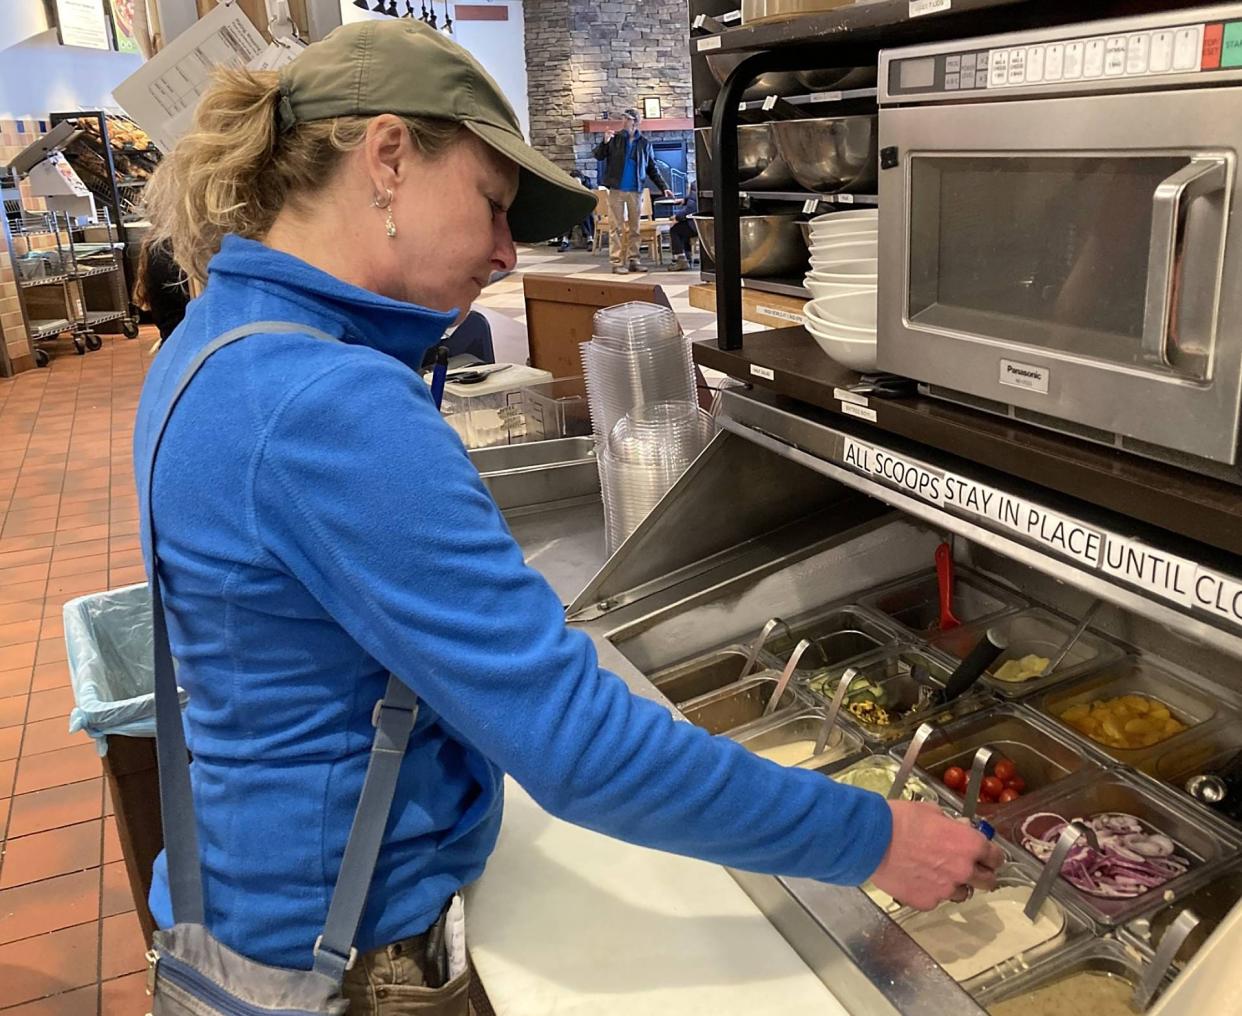 Lisa Susann checks the temperatures of salad dressings at Panera Bread, 2501 W. 12th St. Susann is an environmental protection specialist with the Erie County Department of Health.